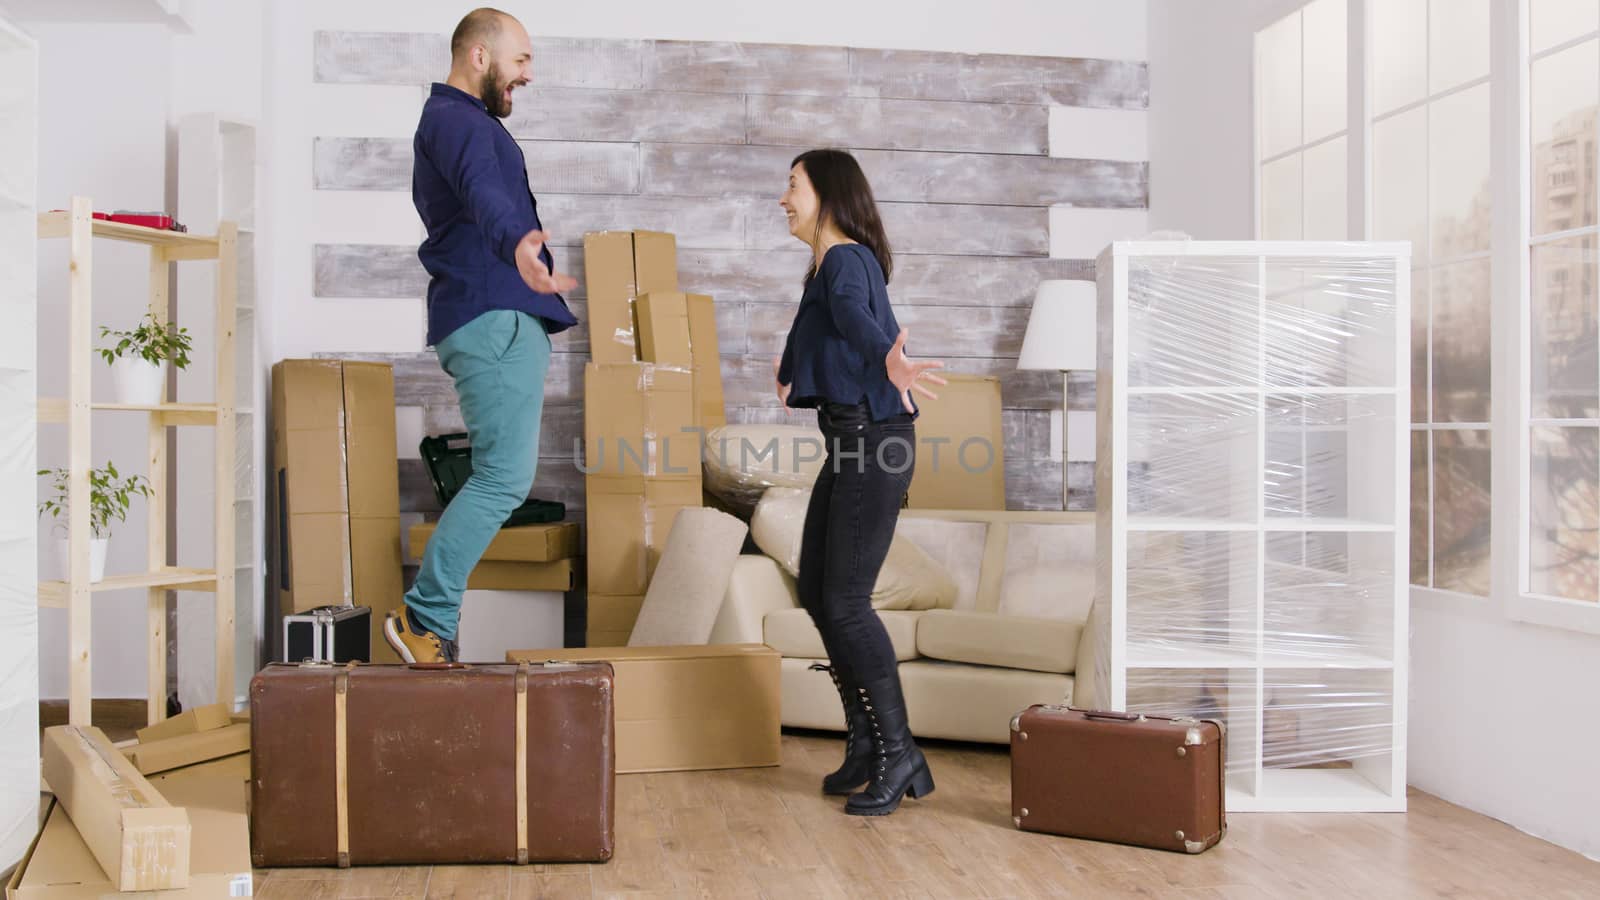 Happy young couple jumping in their new apartment. Excited about their new apartment. Suitcases in apartment.